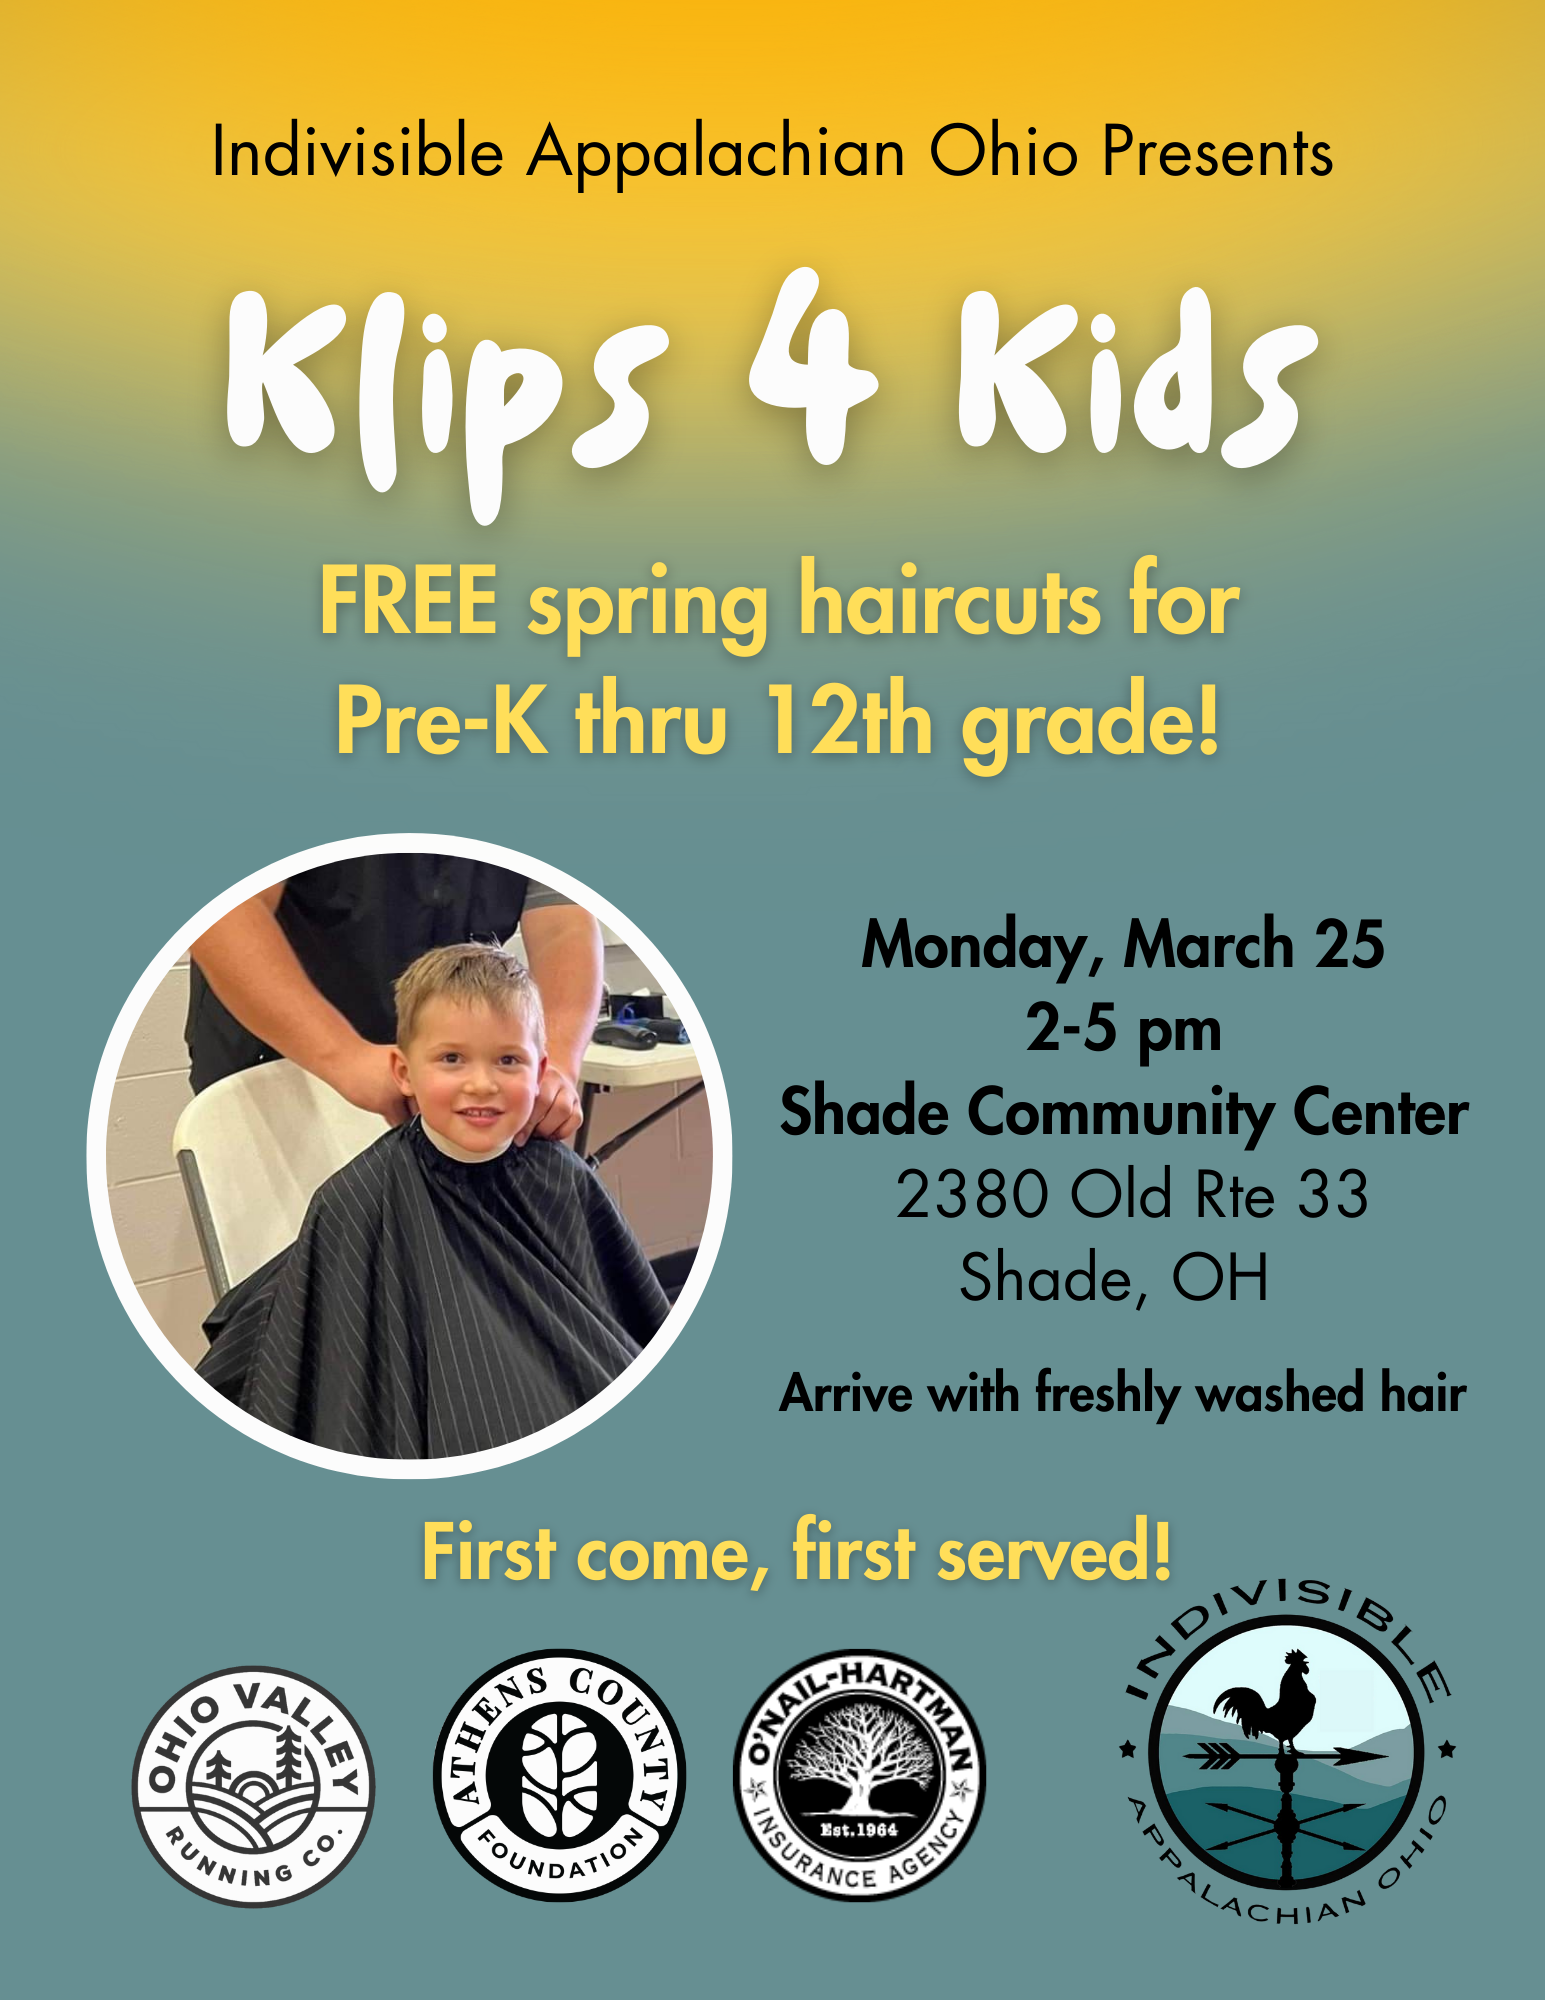 An image of a flyer for the Klips 4 Kids program.